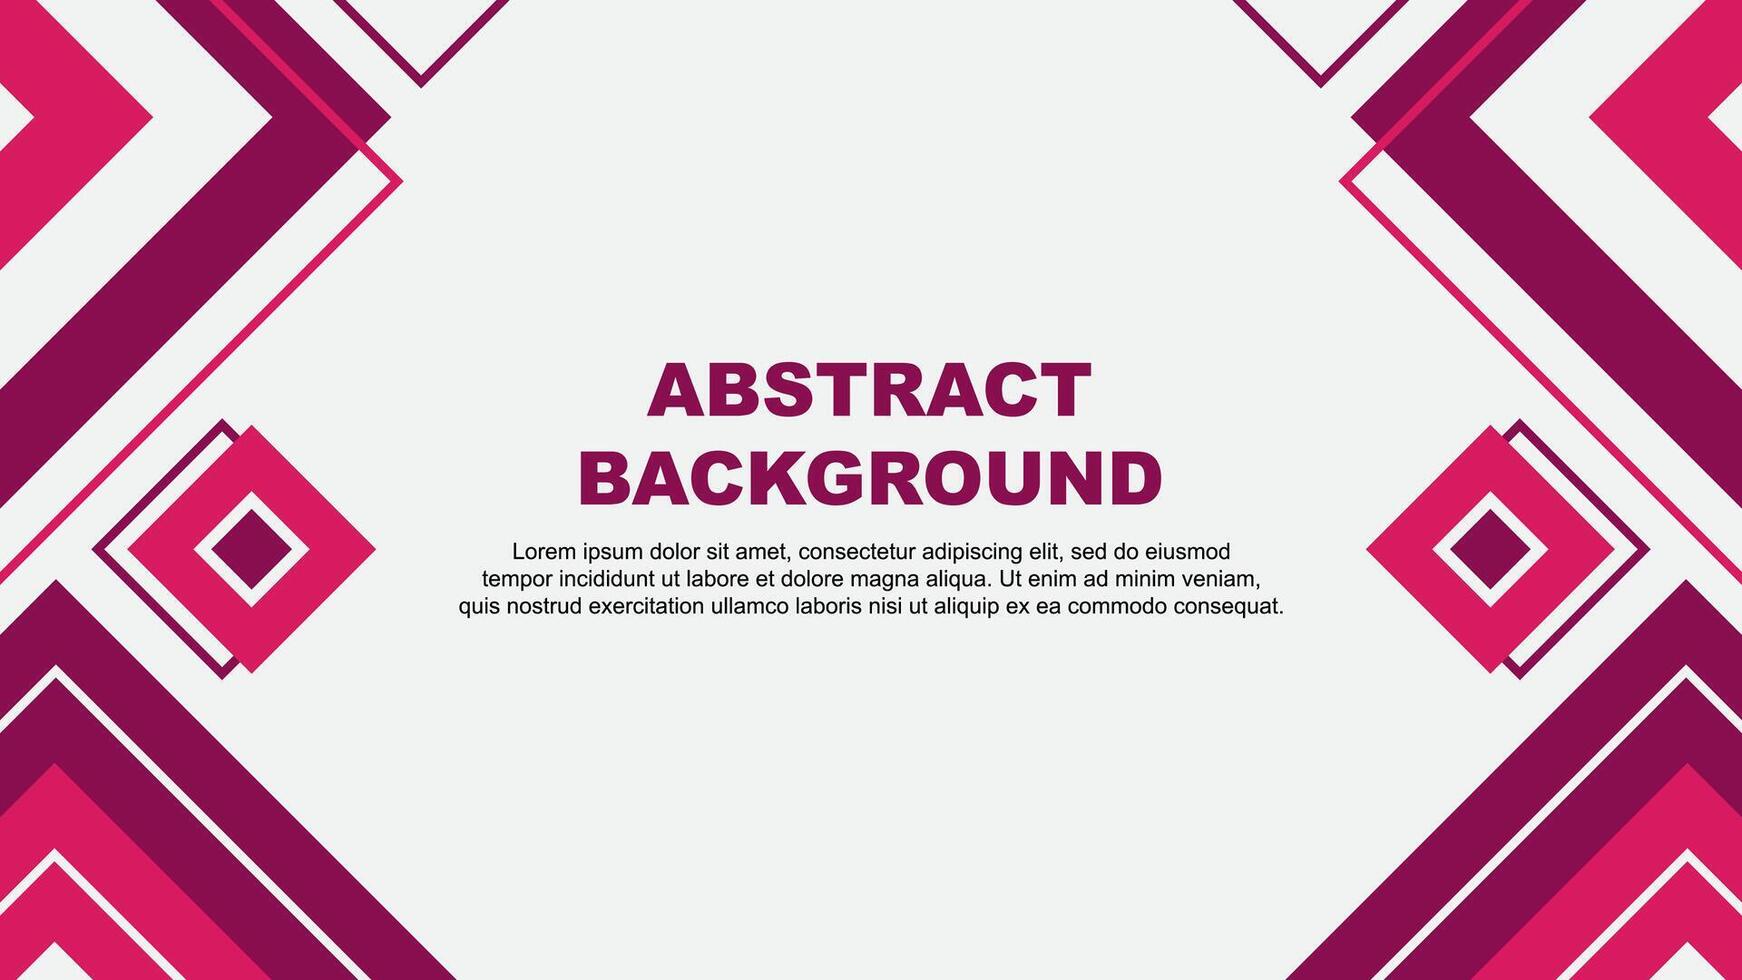 Abstract Pink Background Design Template. Abstract Banner Wallpaper Illustration. Pink Background vector